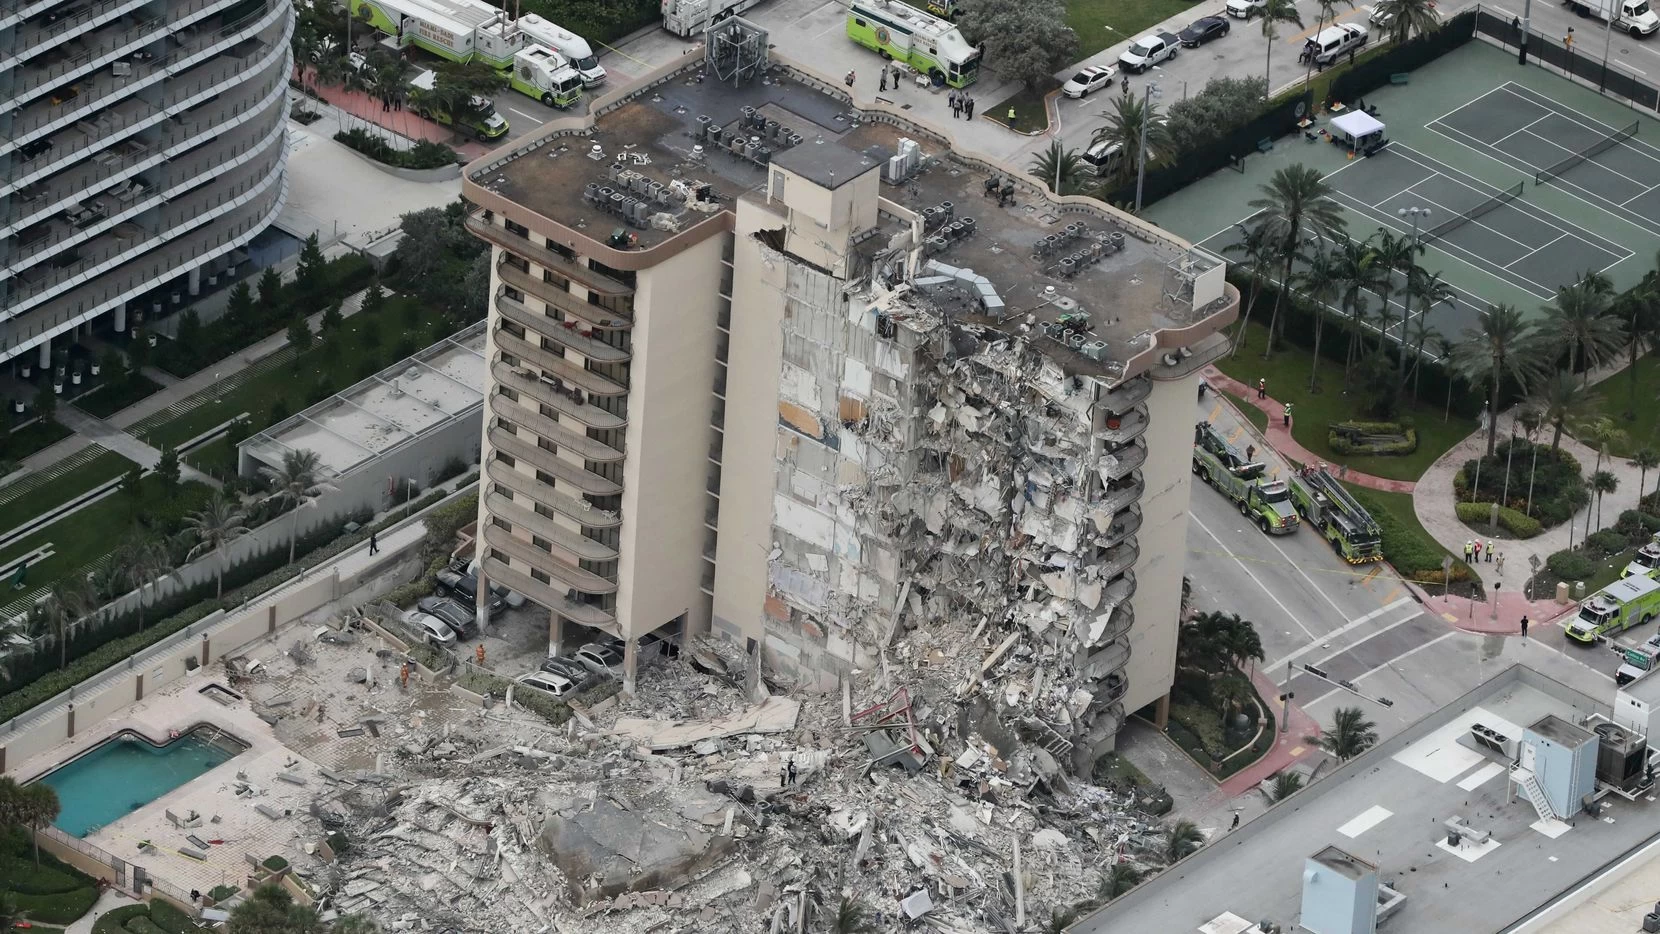 Many feared dead, over 100 missing as 12-storey building collapses in Florida